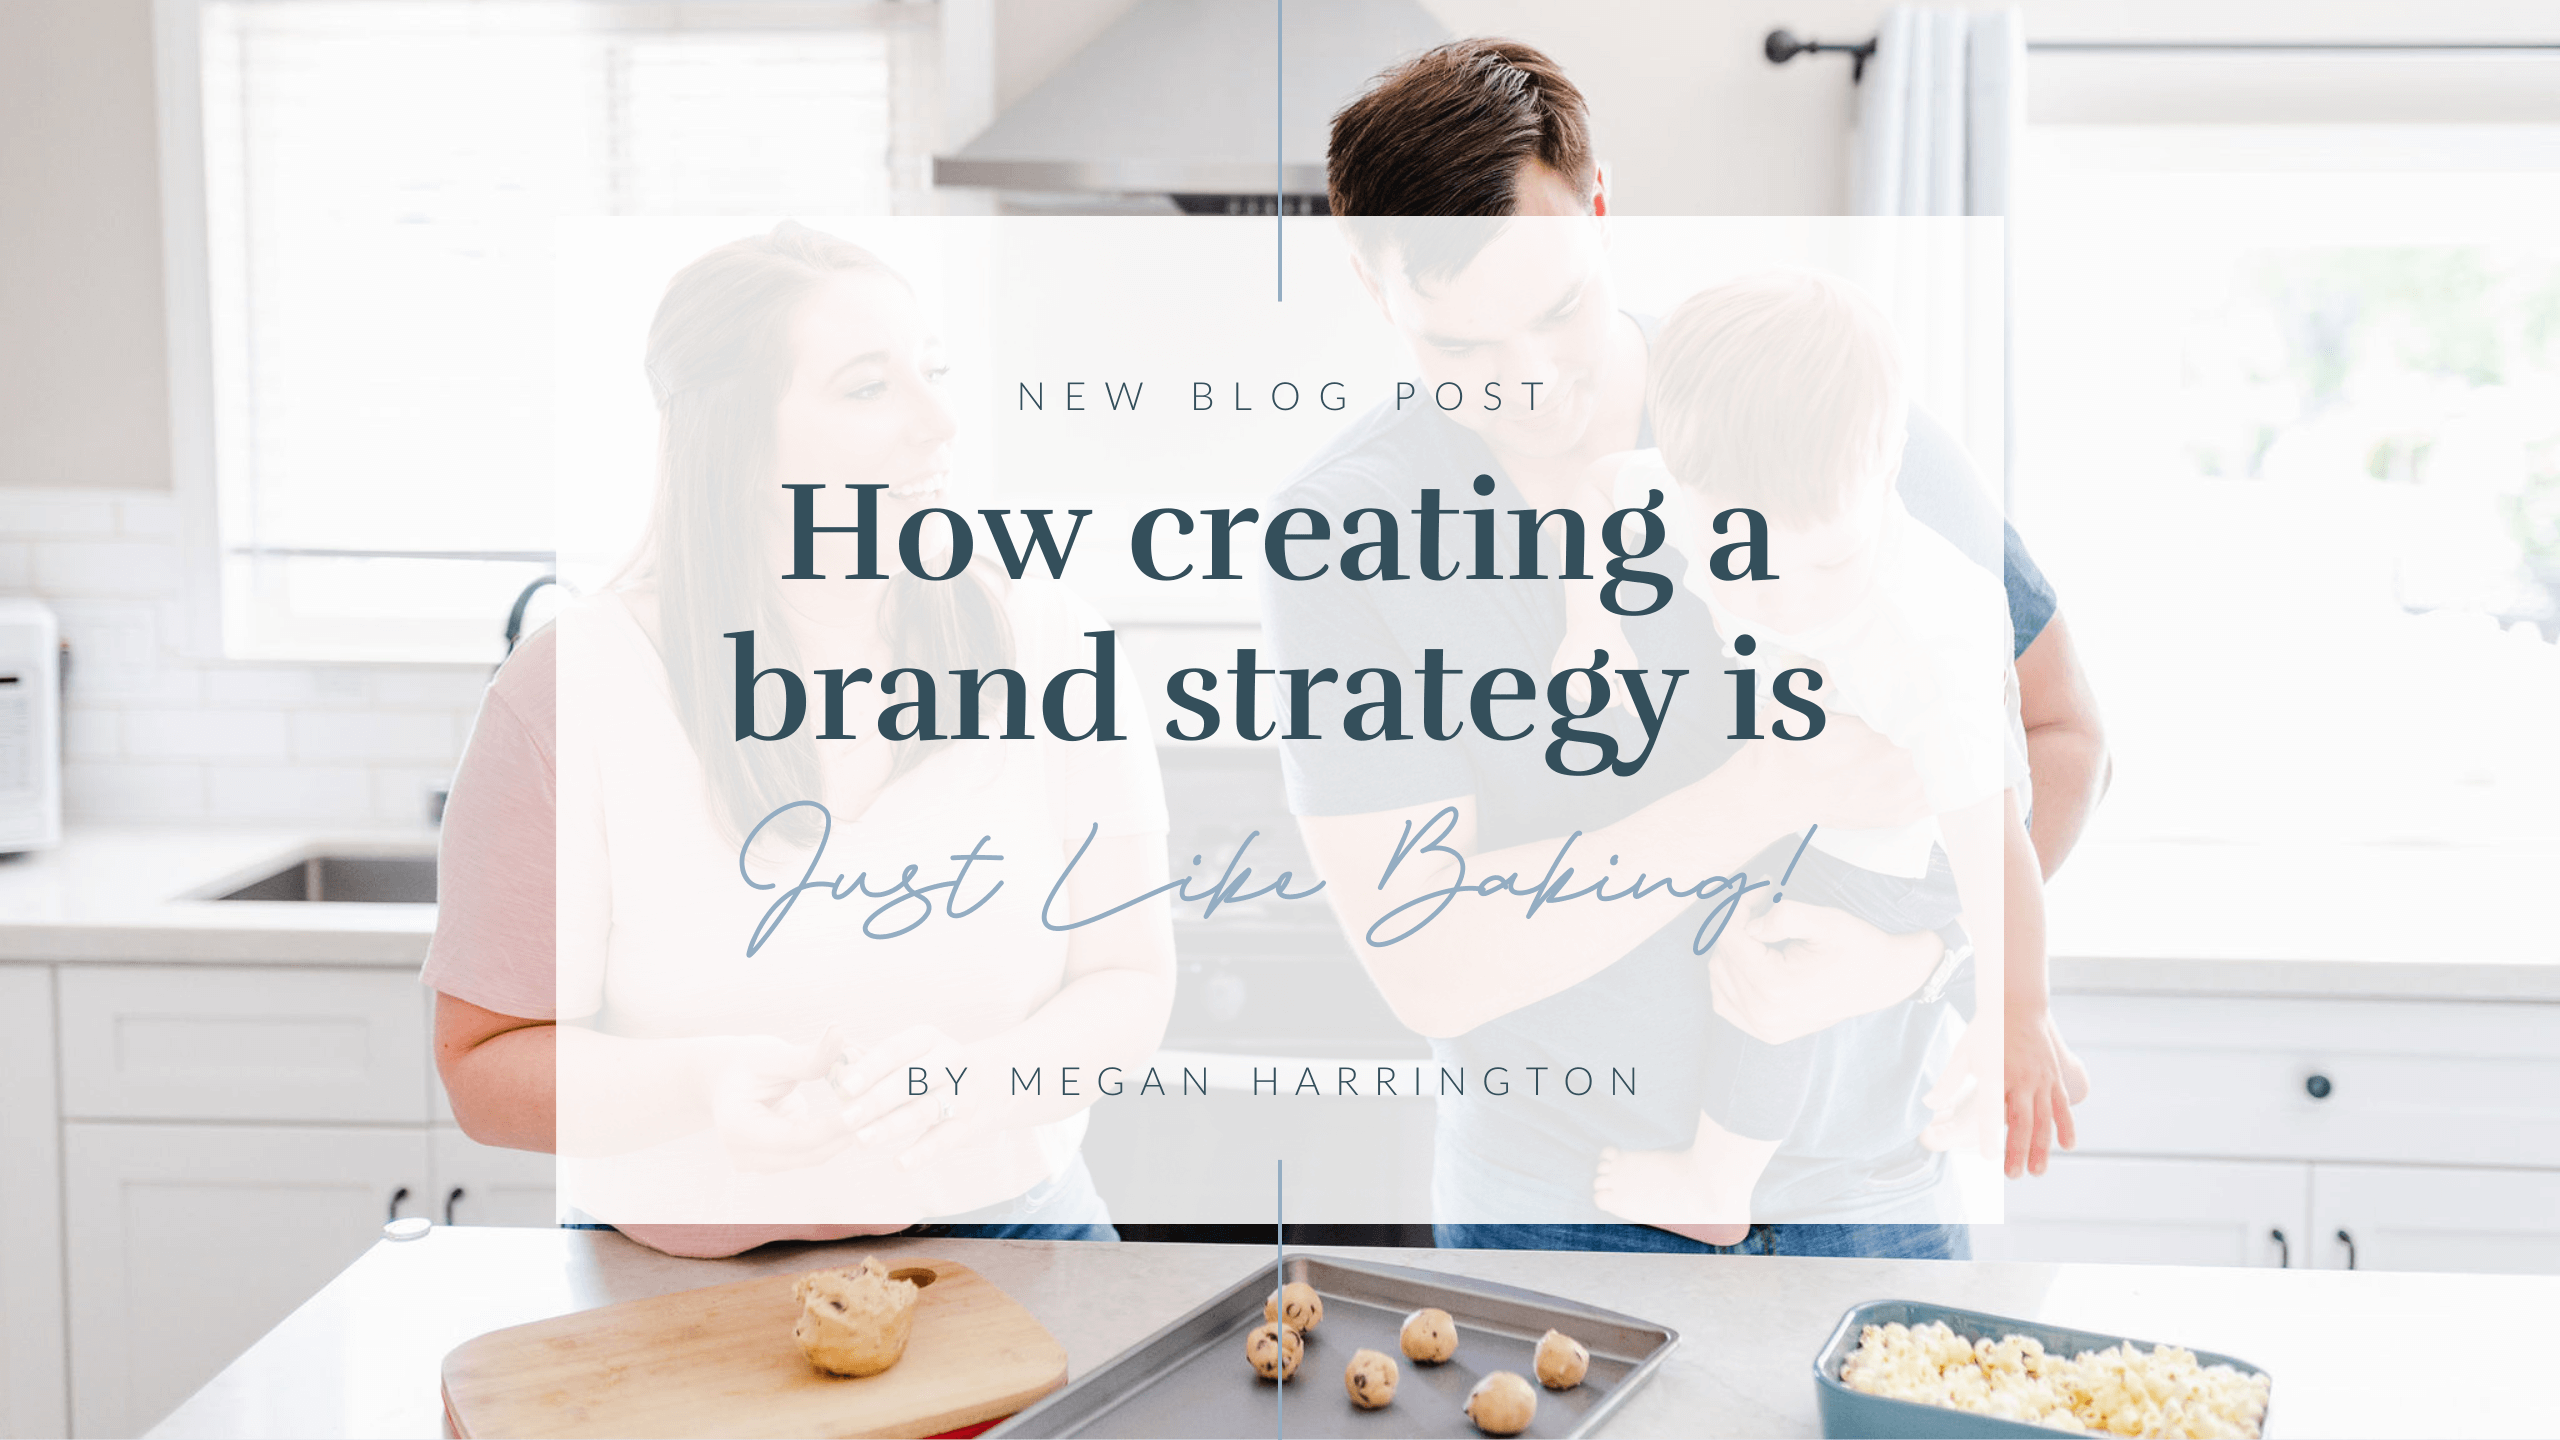 How a Brand Strategy is Just Like Baking